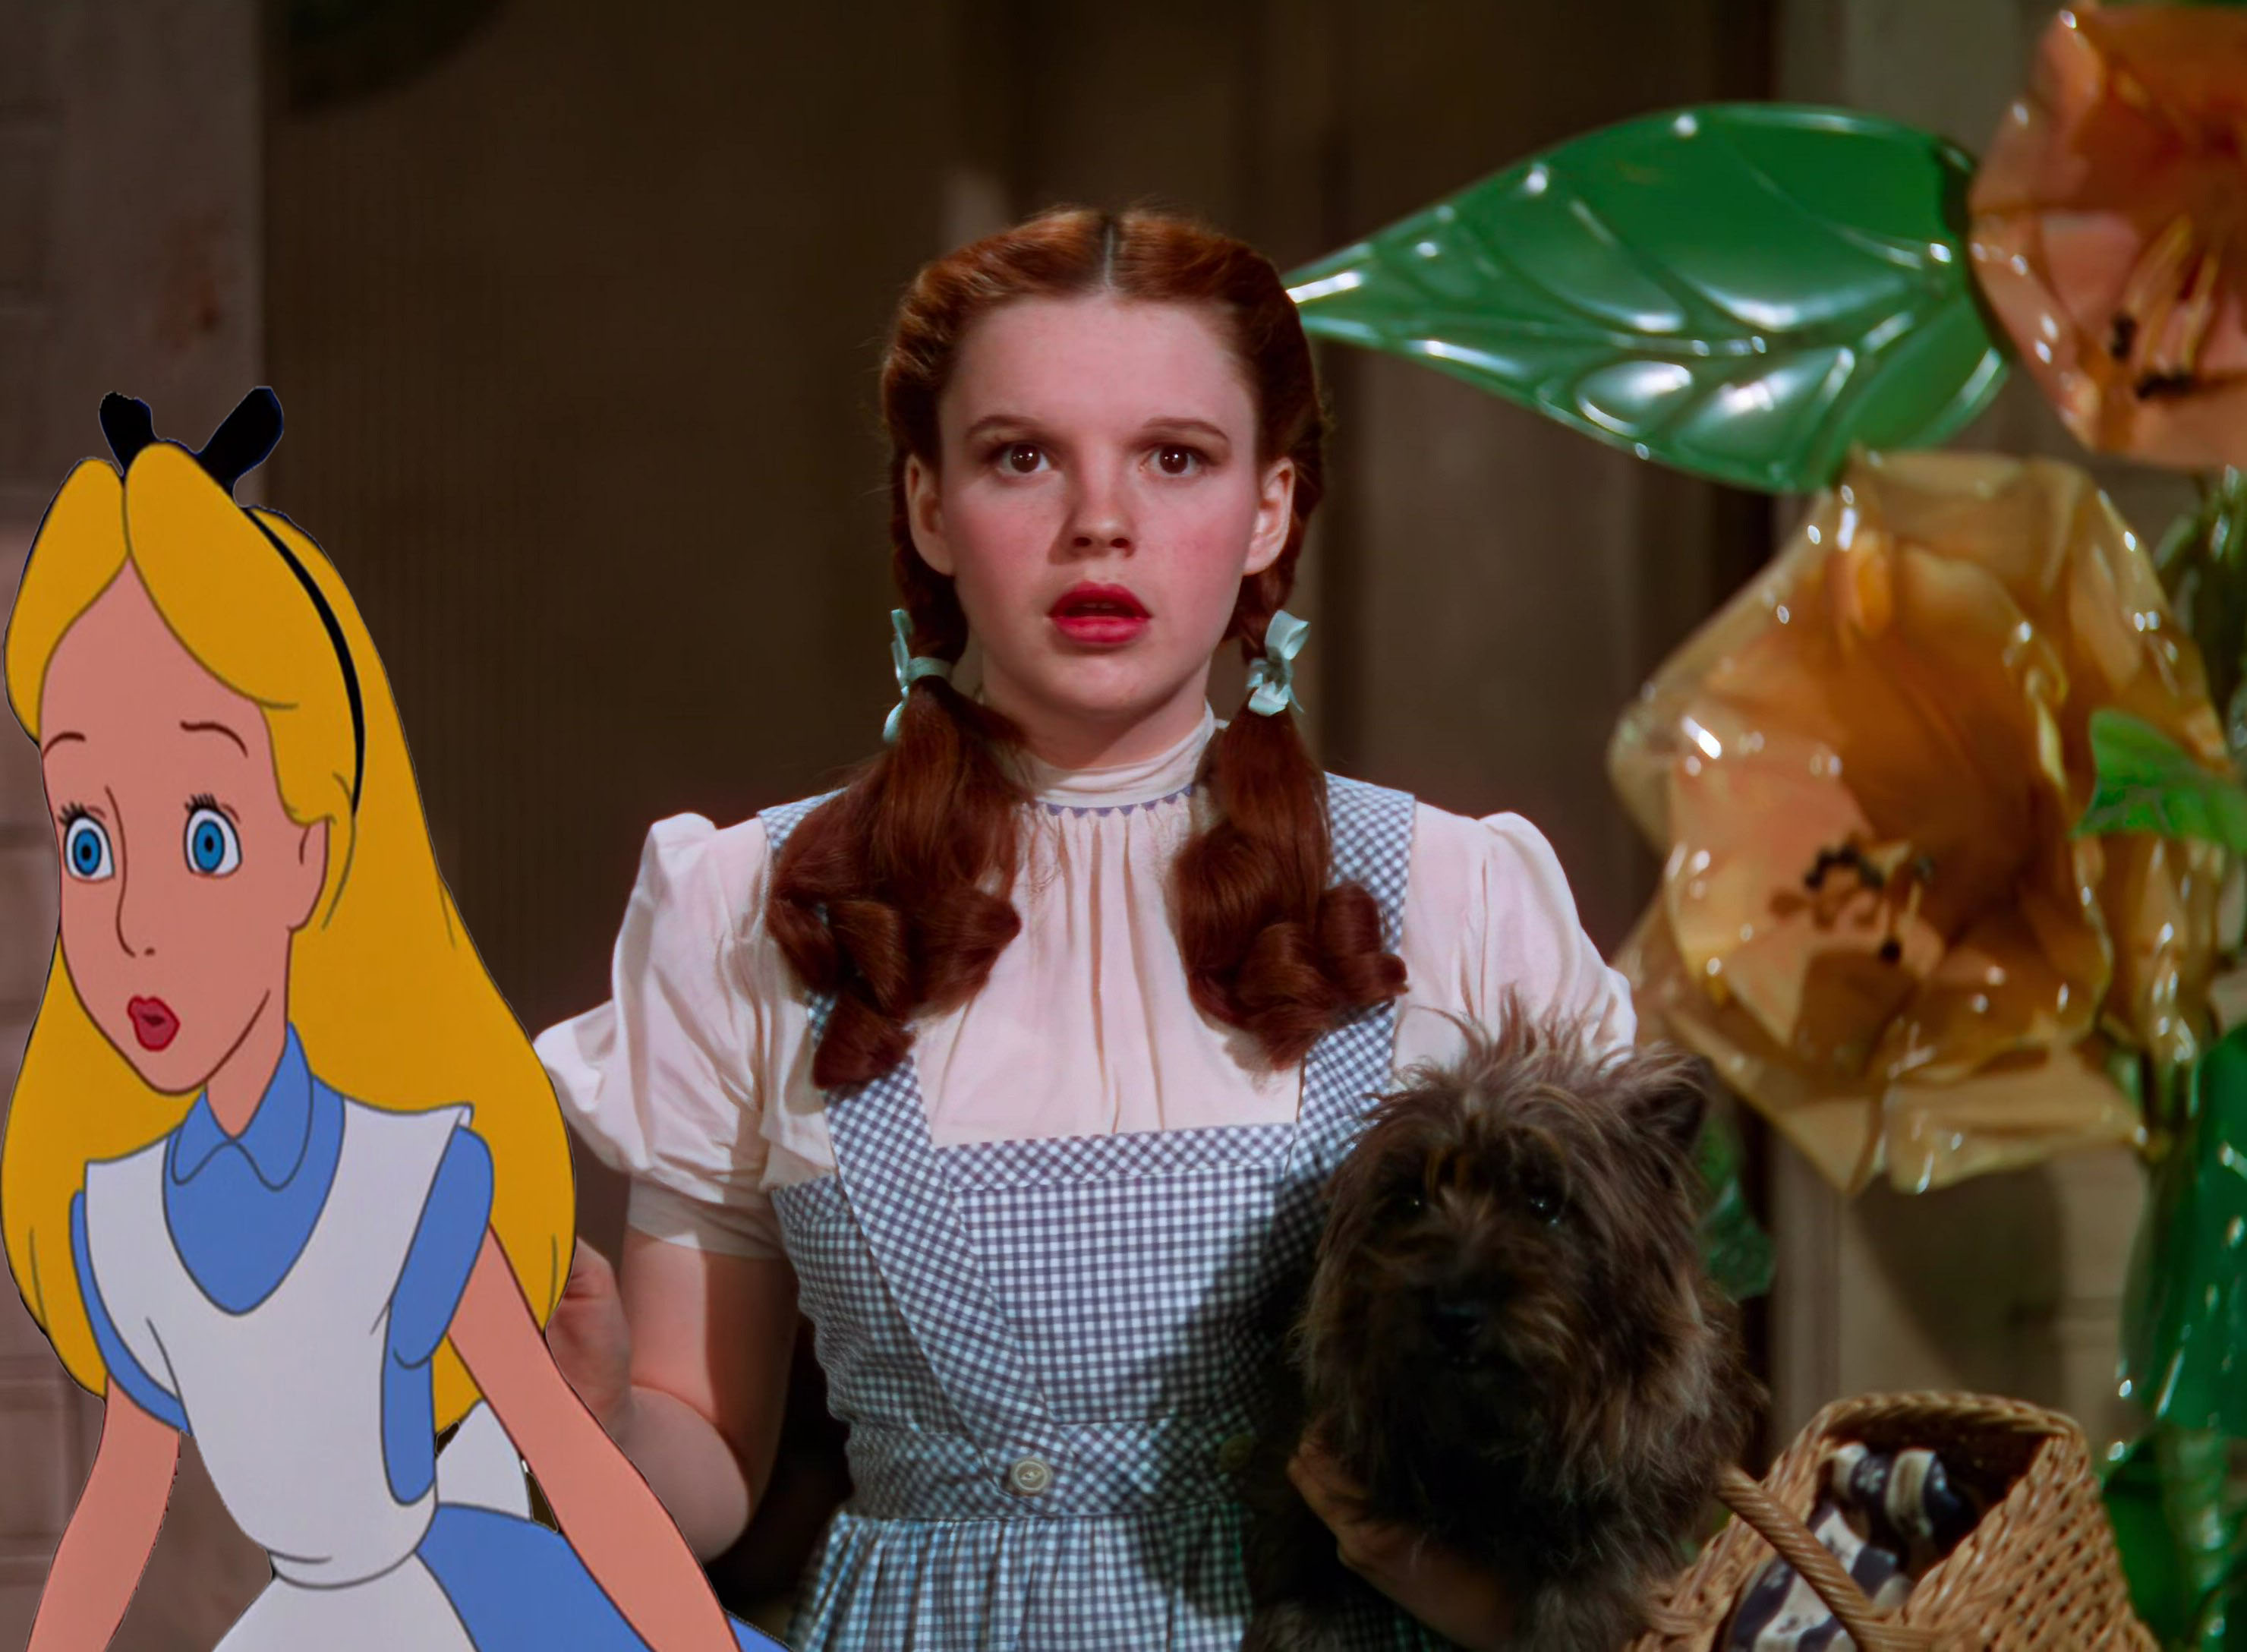 Alice (Disney) and Dorothy Gale in Oz by HomerSimpson1983 on DeviantArt